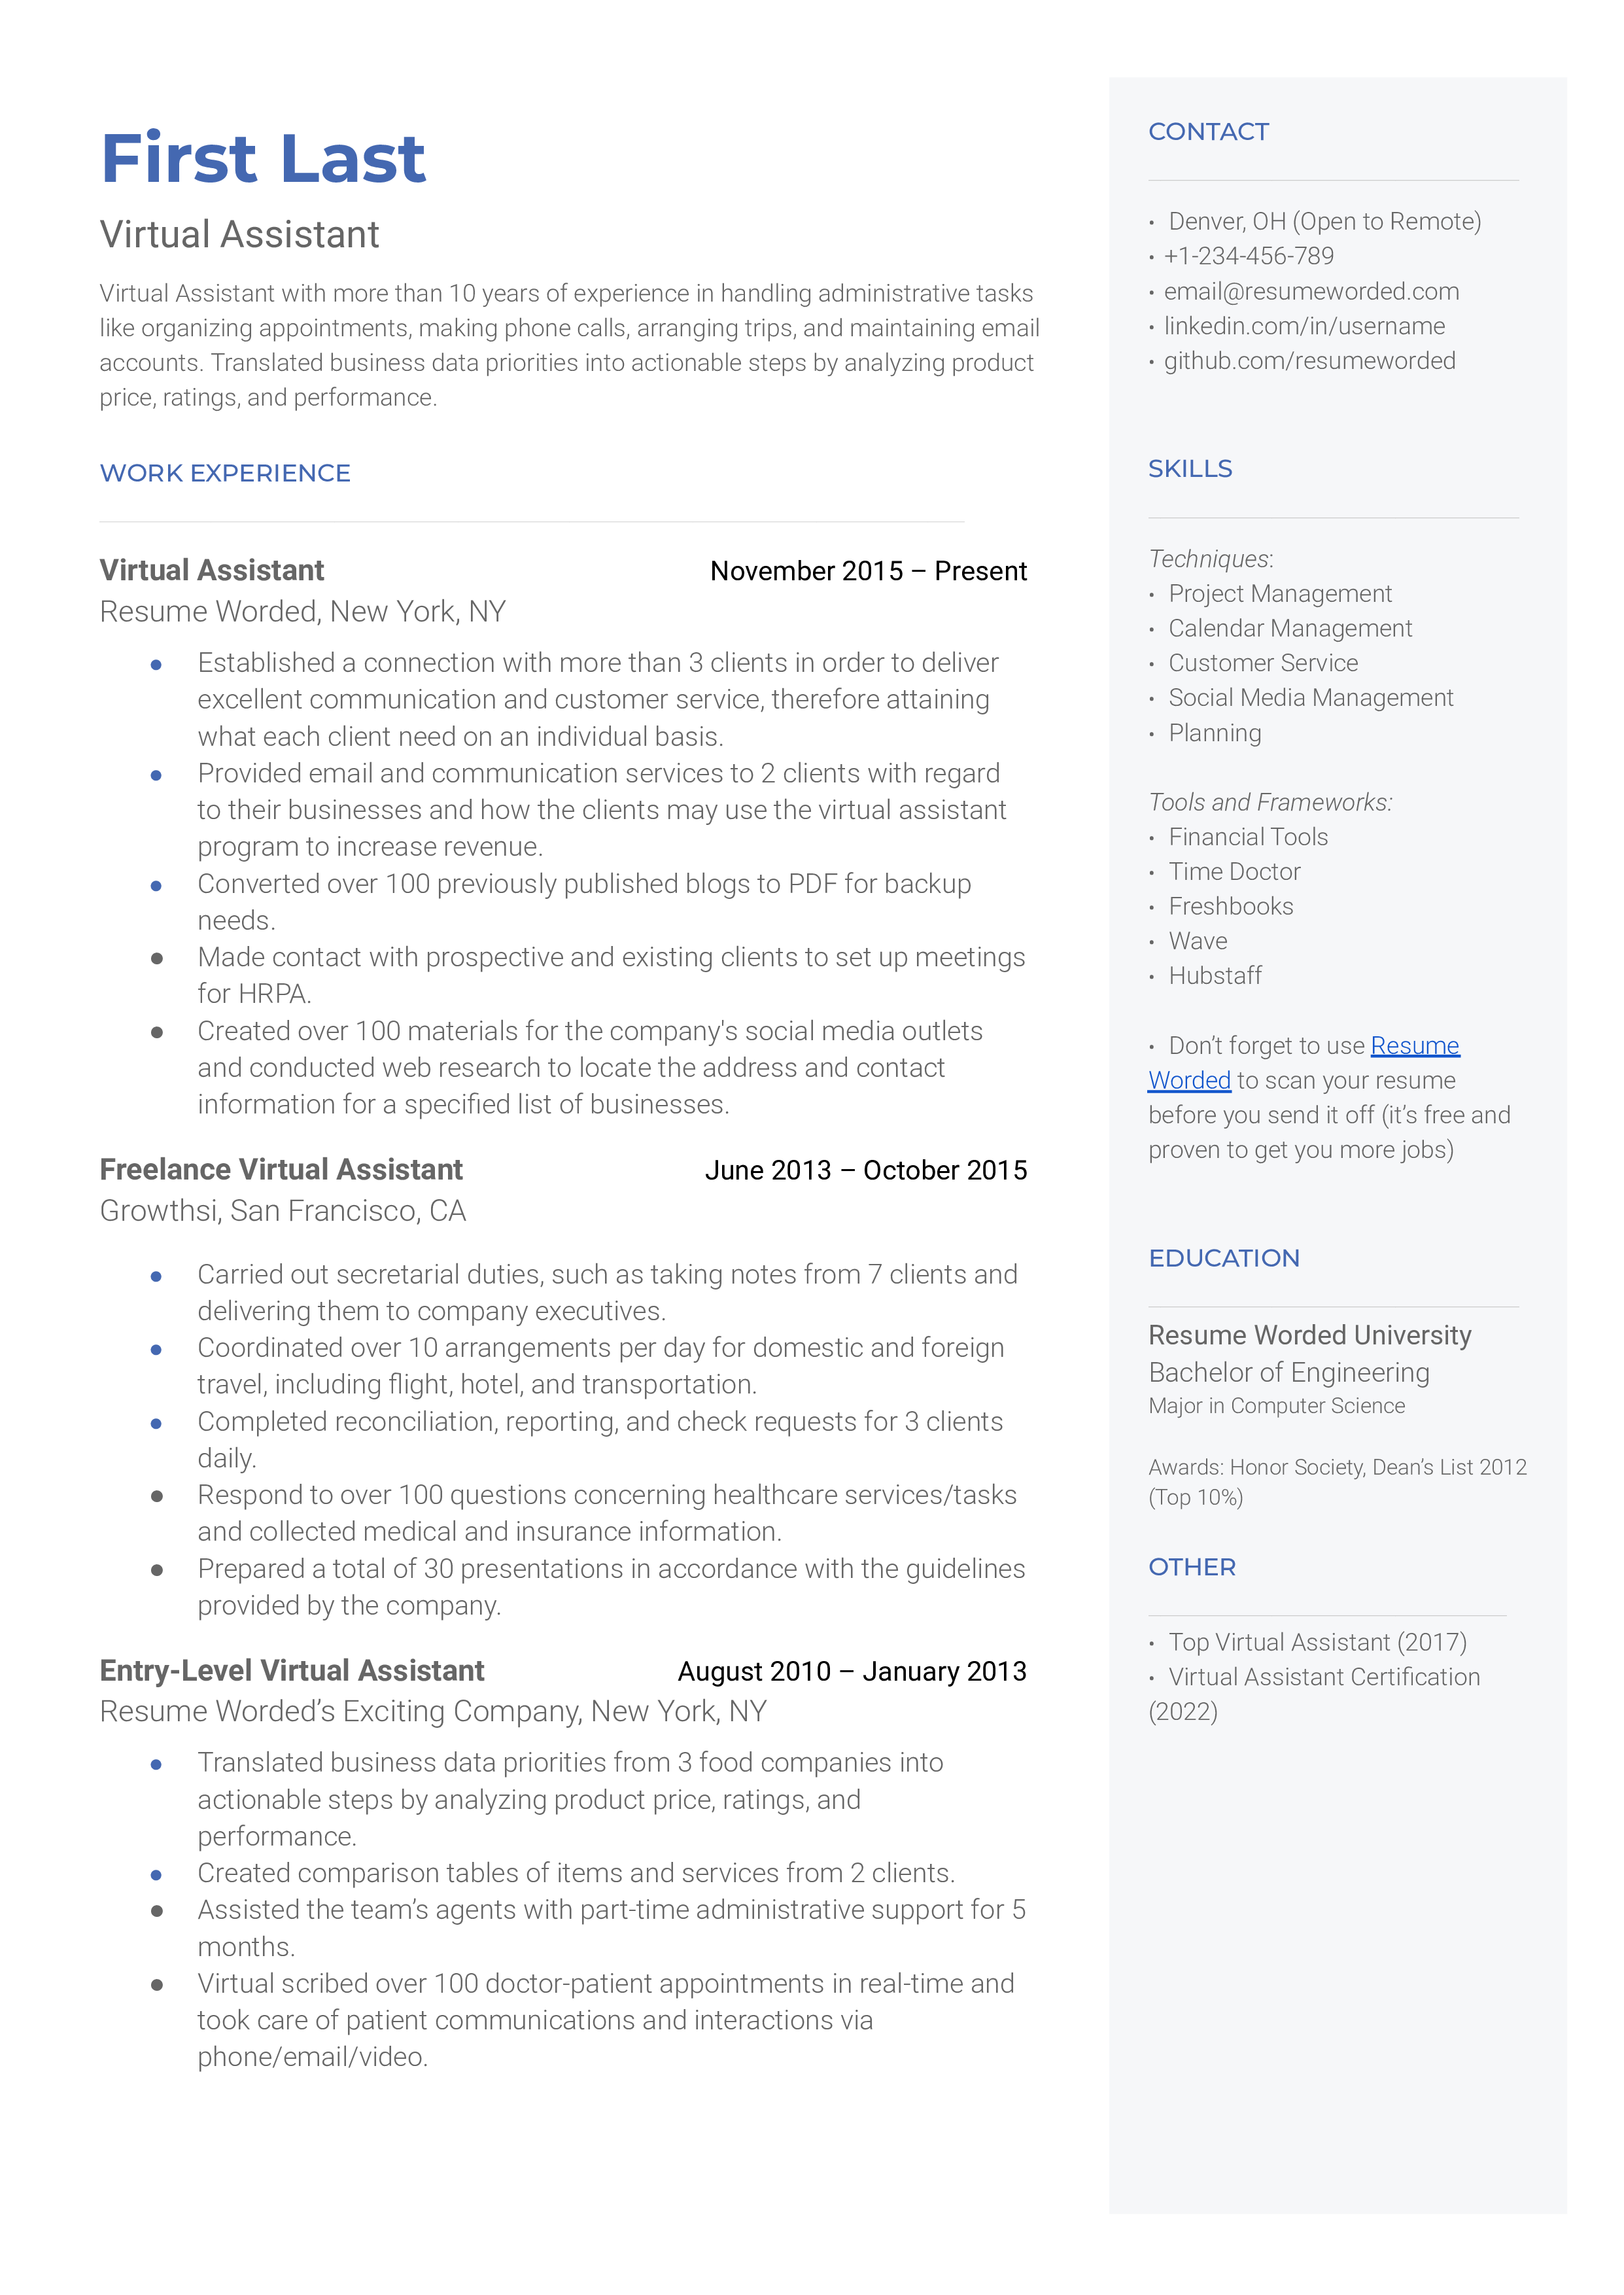 A well-structured CV tailored for a Virtual Assistant role.